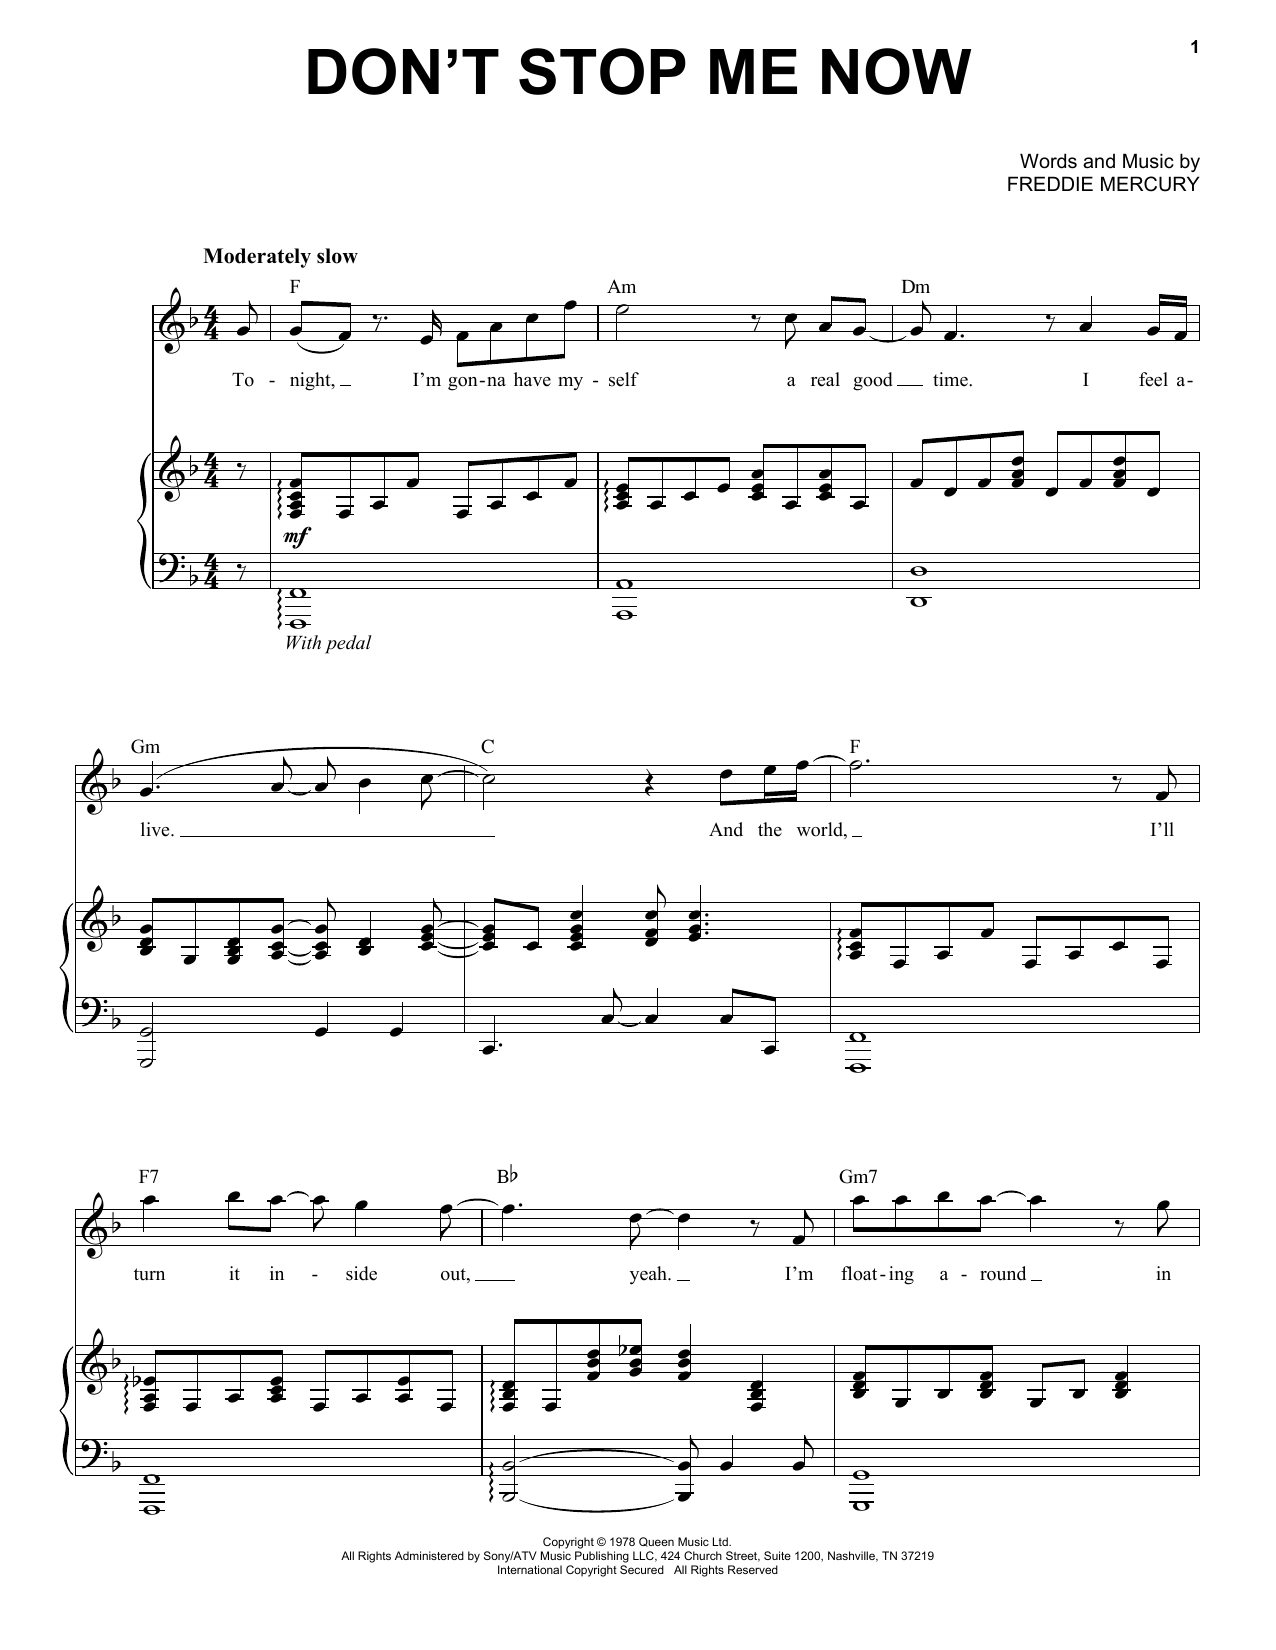 Download Queen Don't Stop Me Now Sheet Music